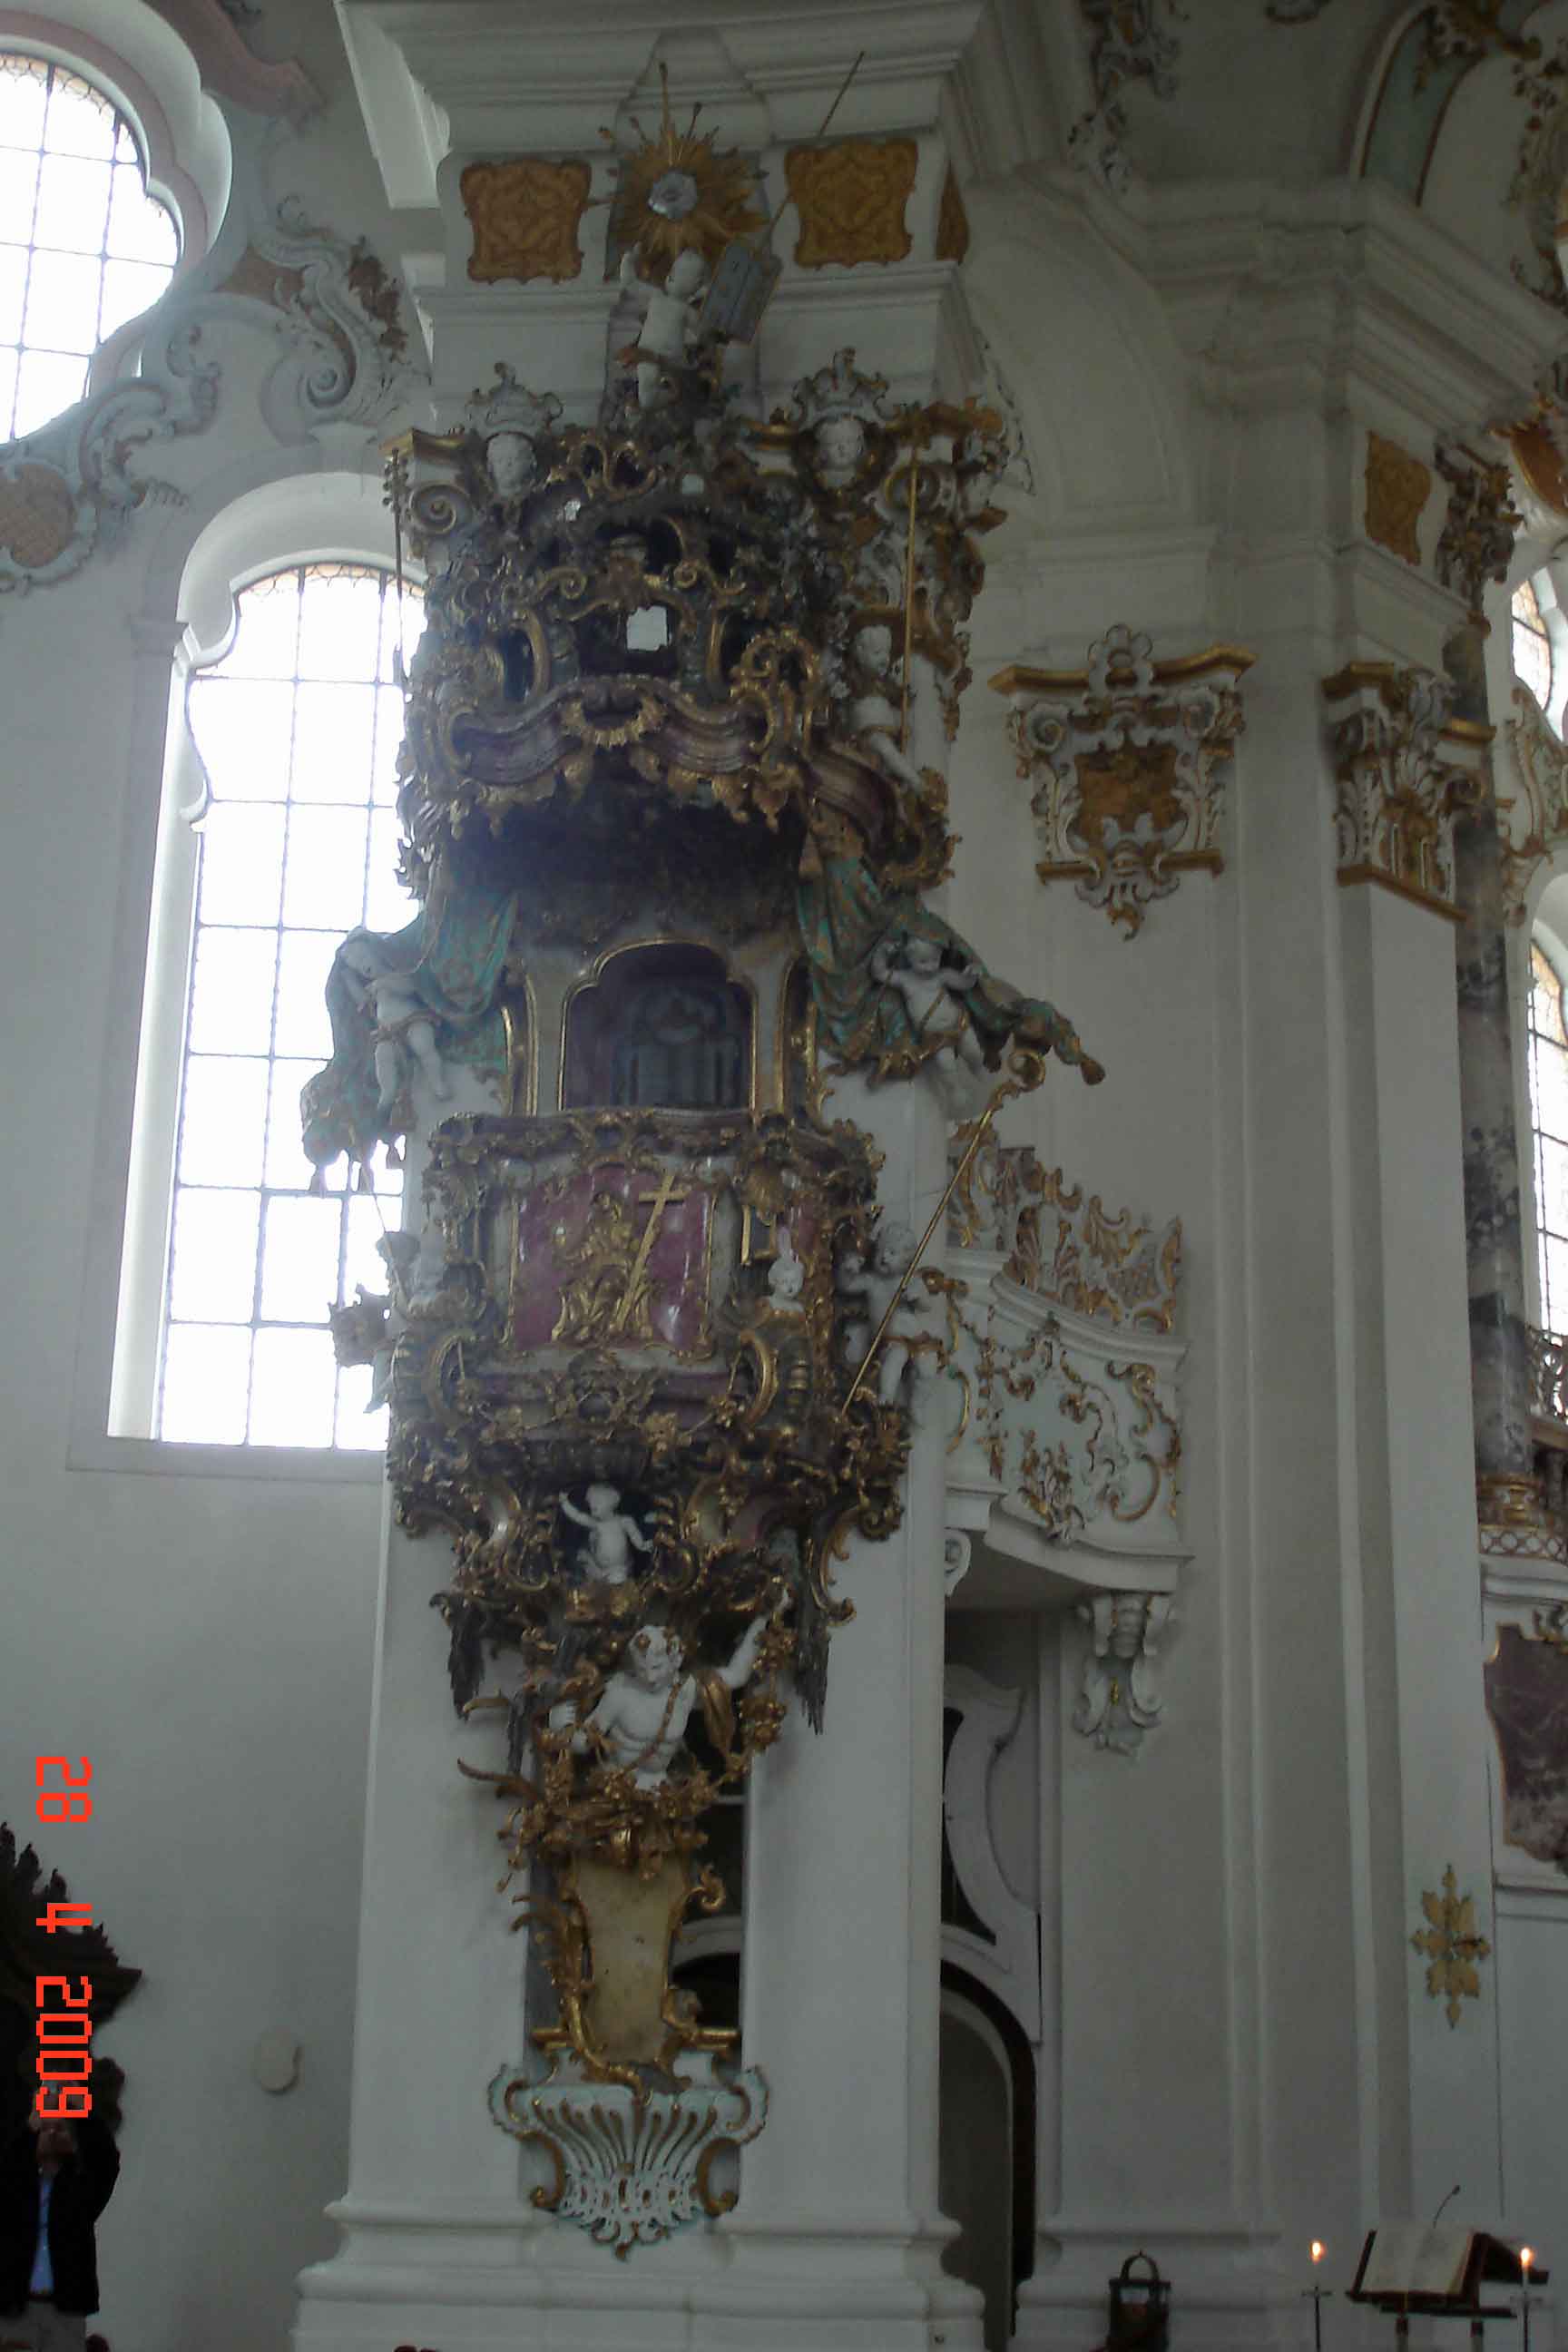 The Wies Church - The Pulpit crowned by the eye of God